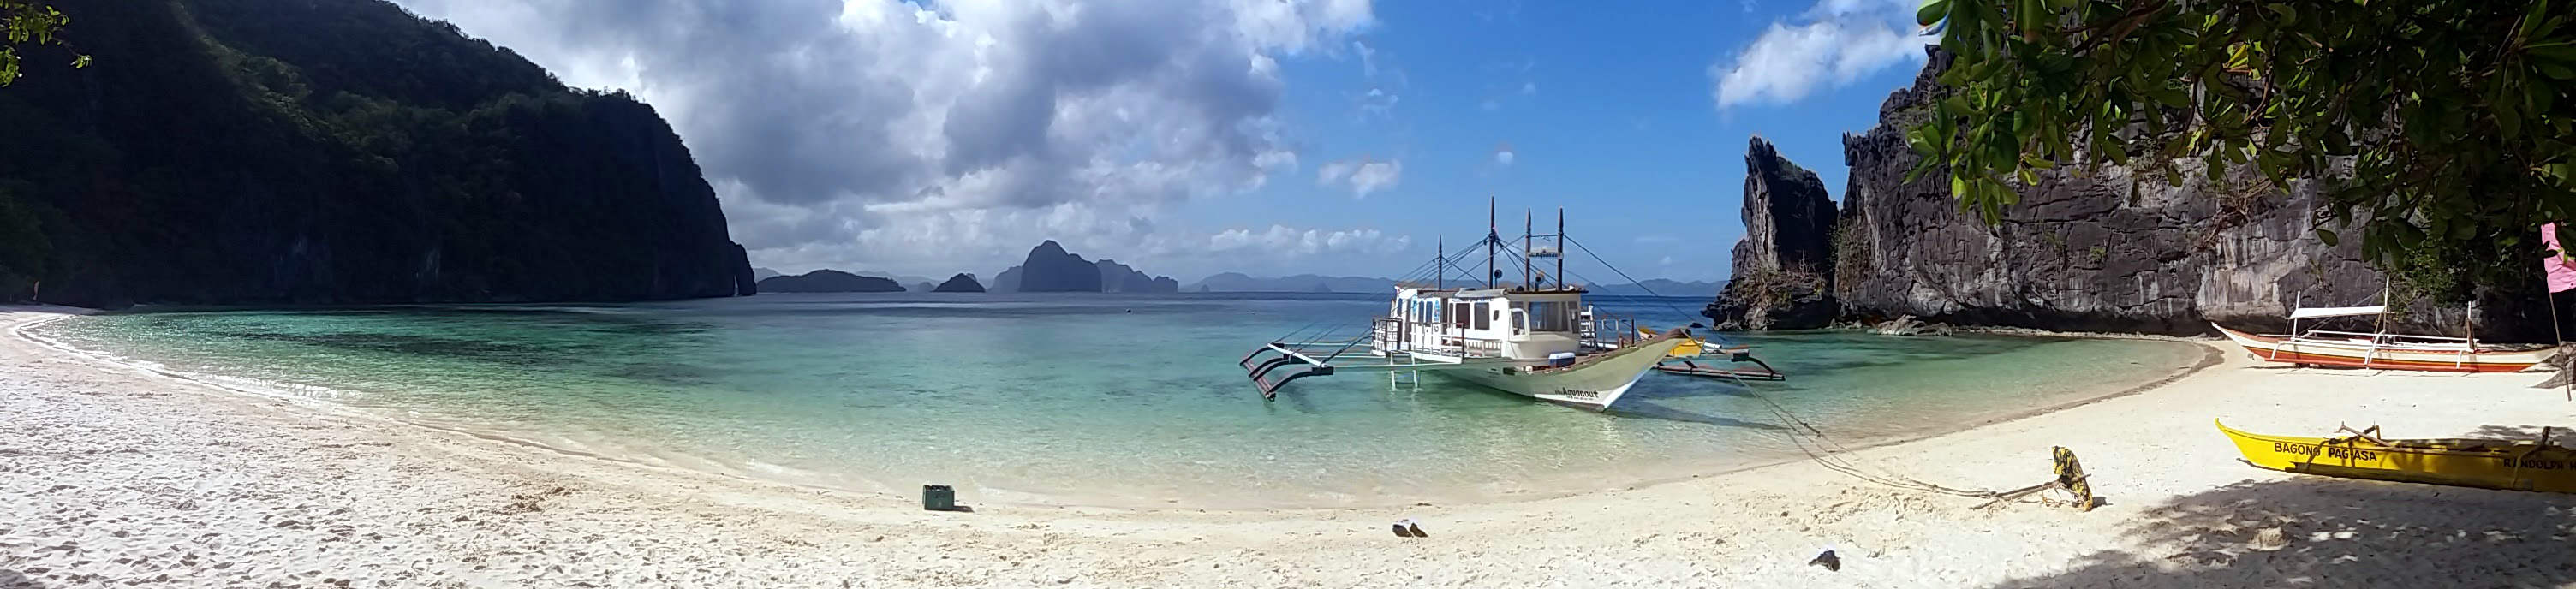 How to get there, El Nido, Philippines